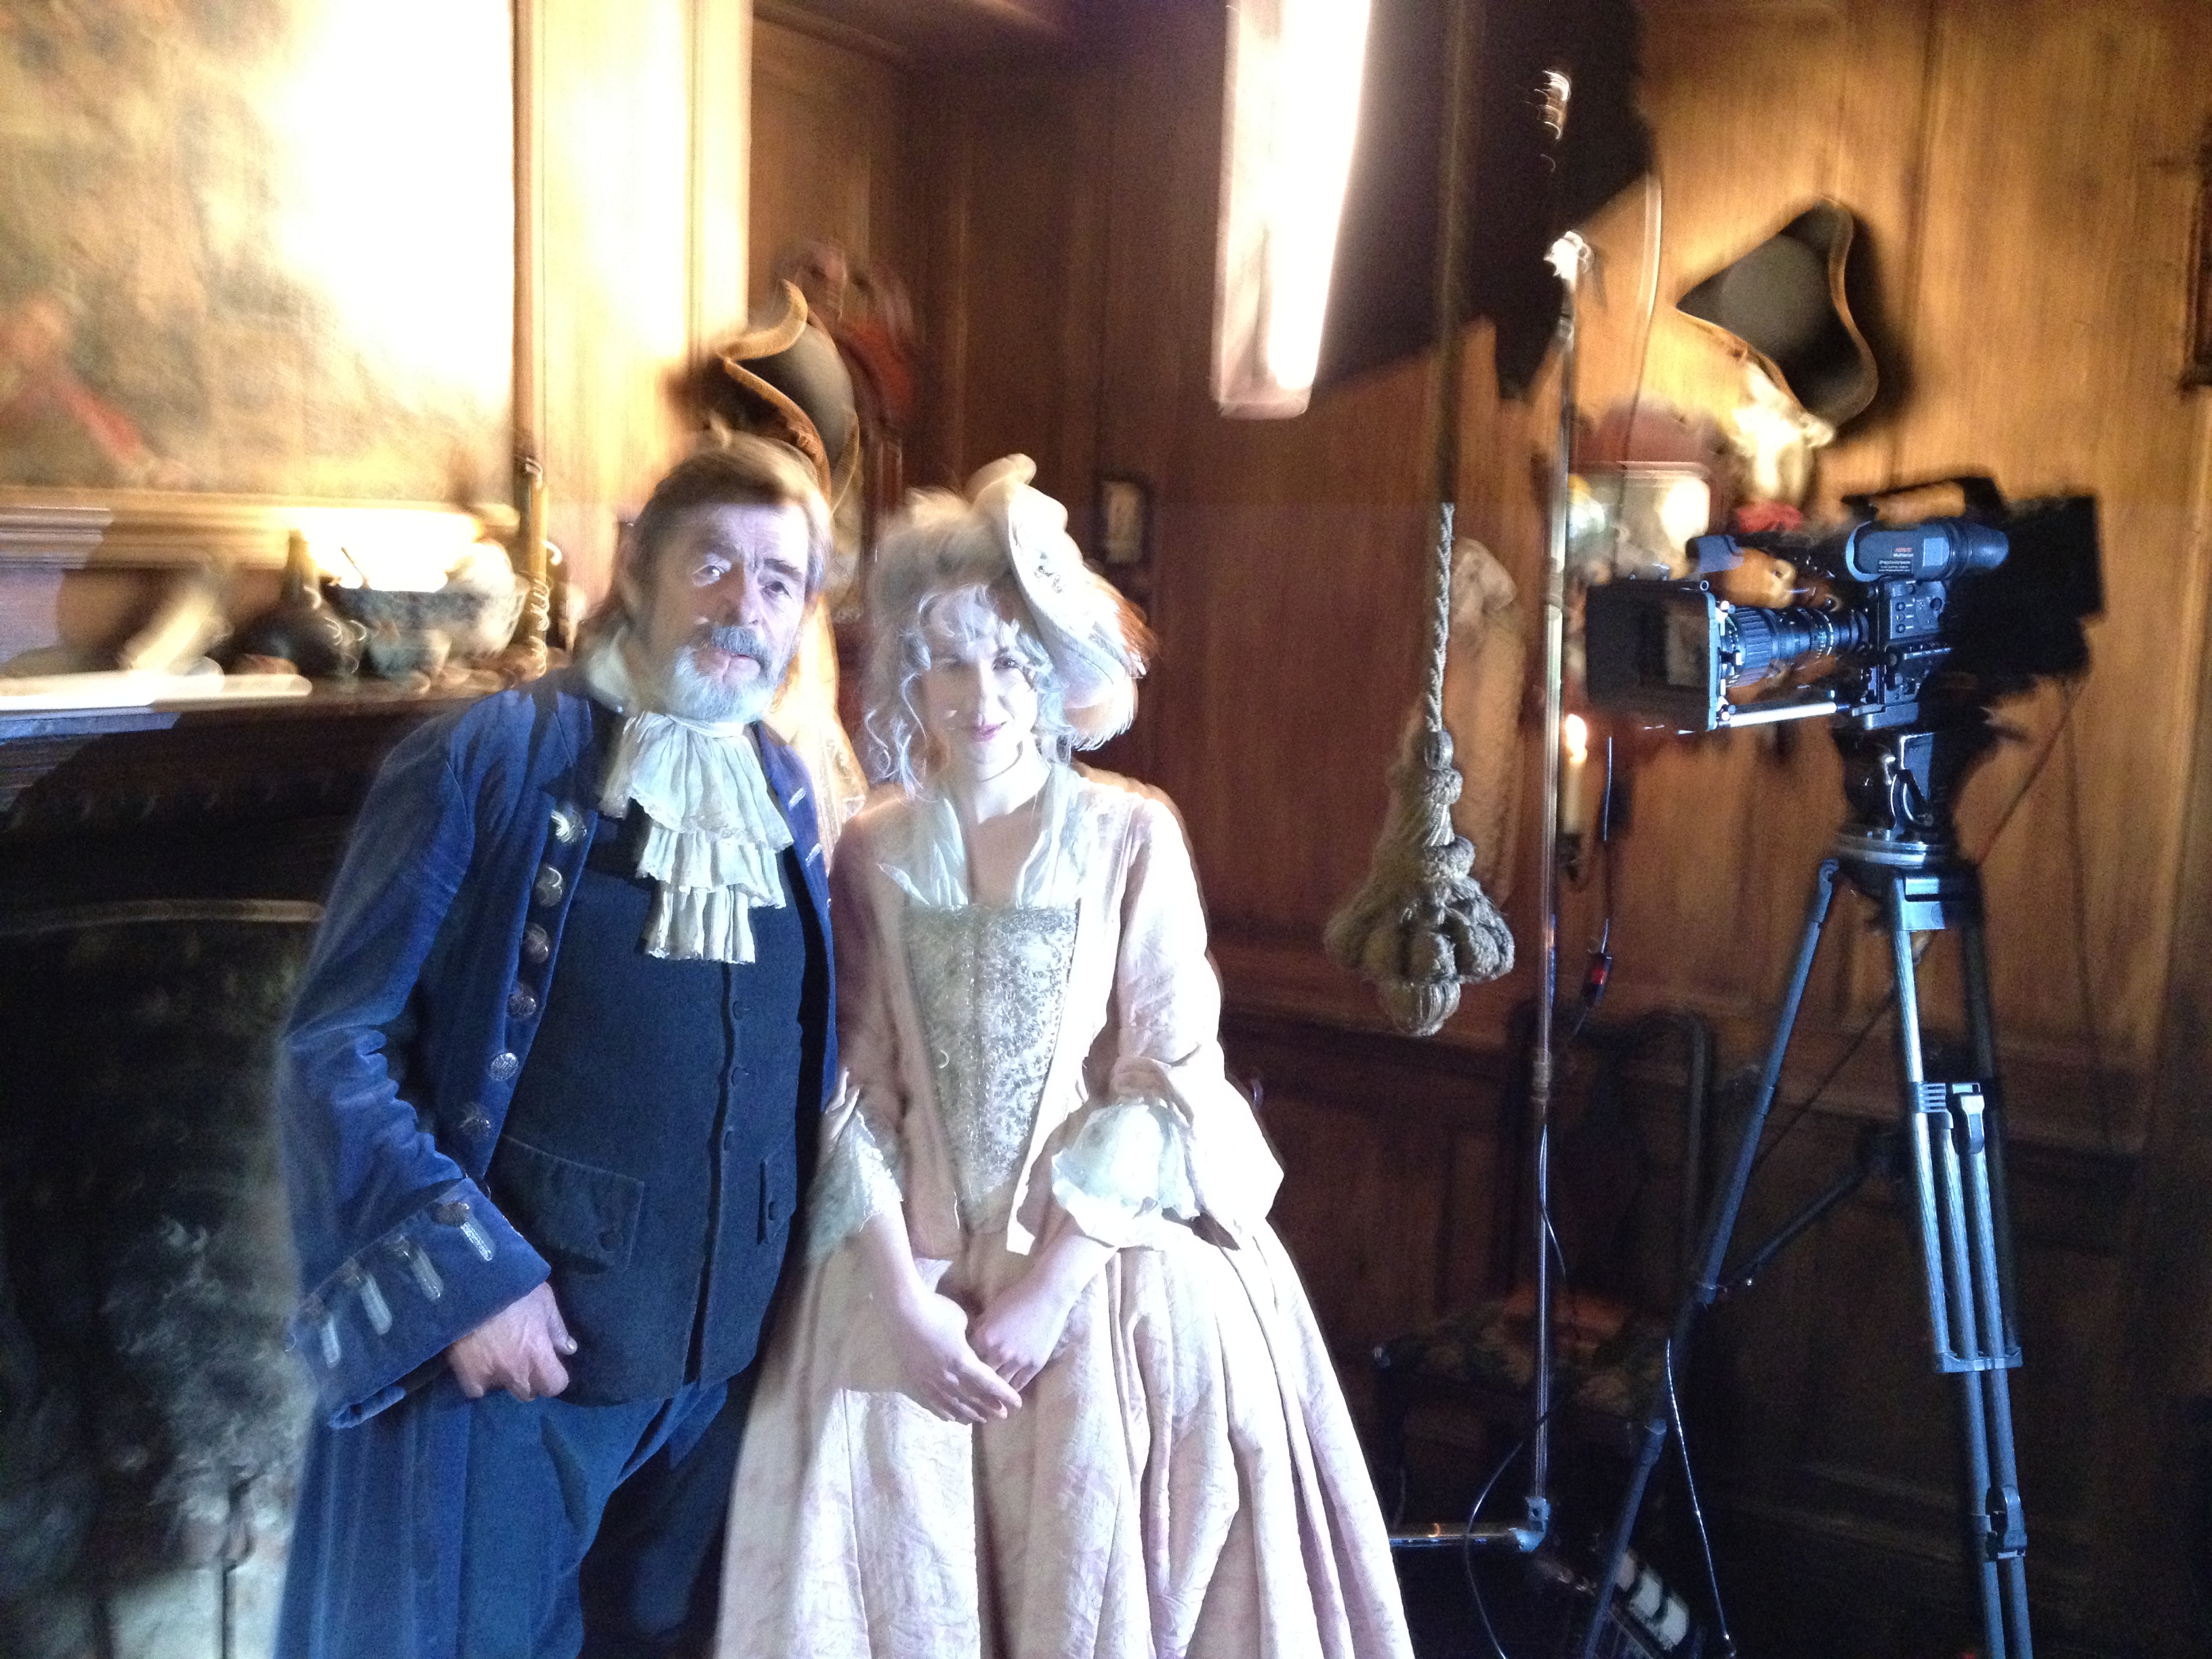 Filming 'Clubs & Styx' on location at the Dennis Severs House in London. David Bailie & Delia Edwards.